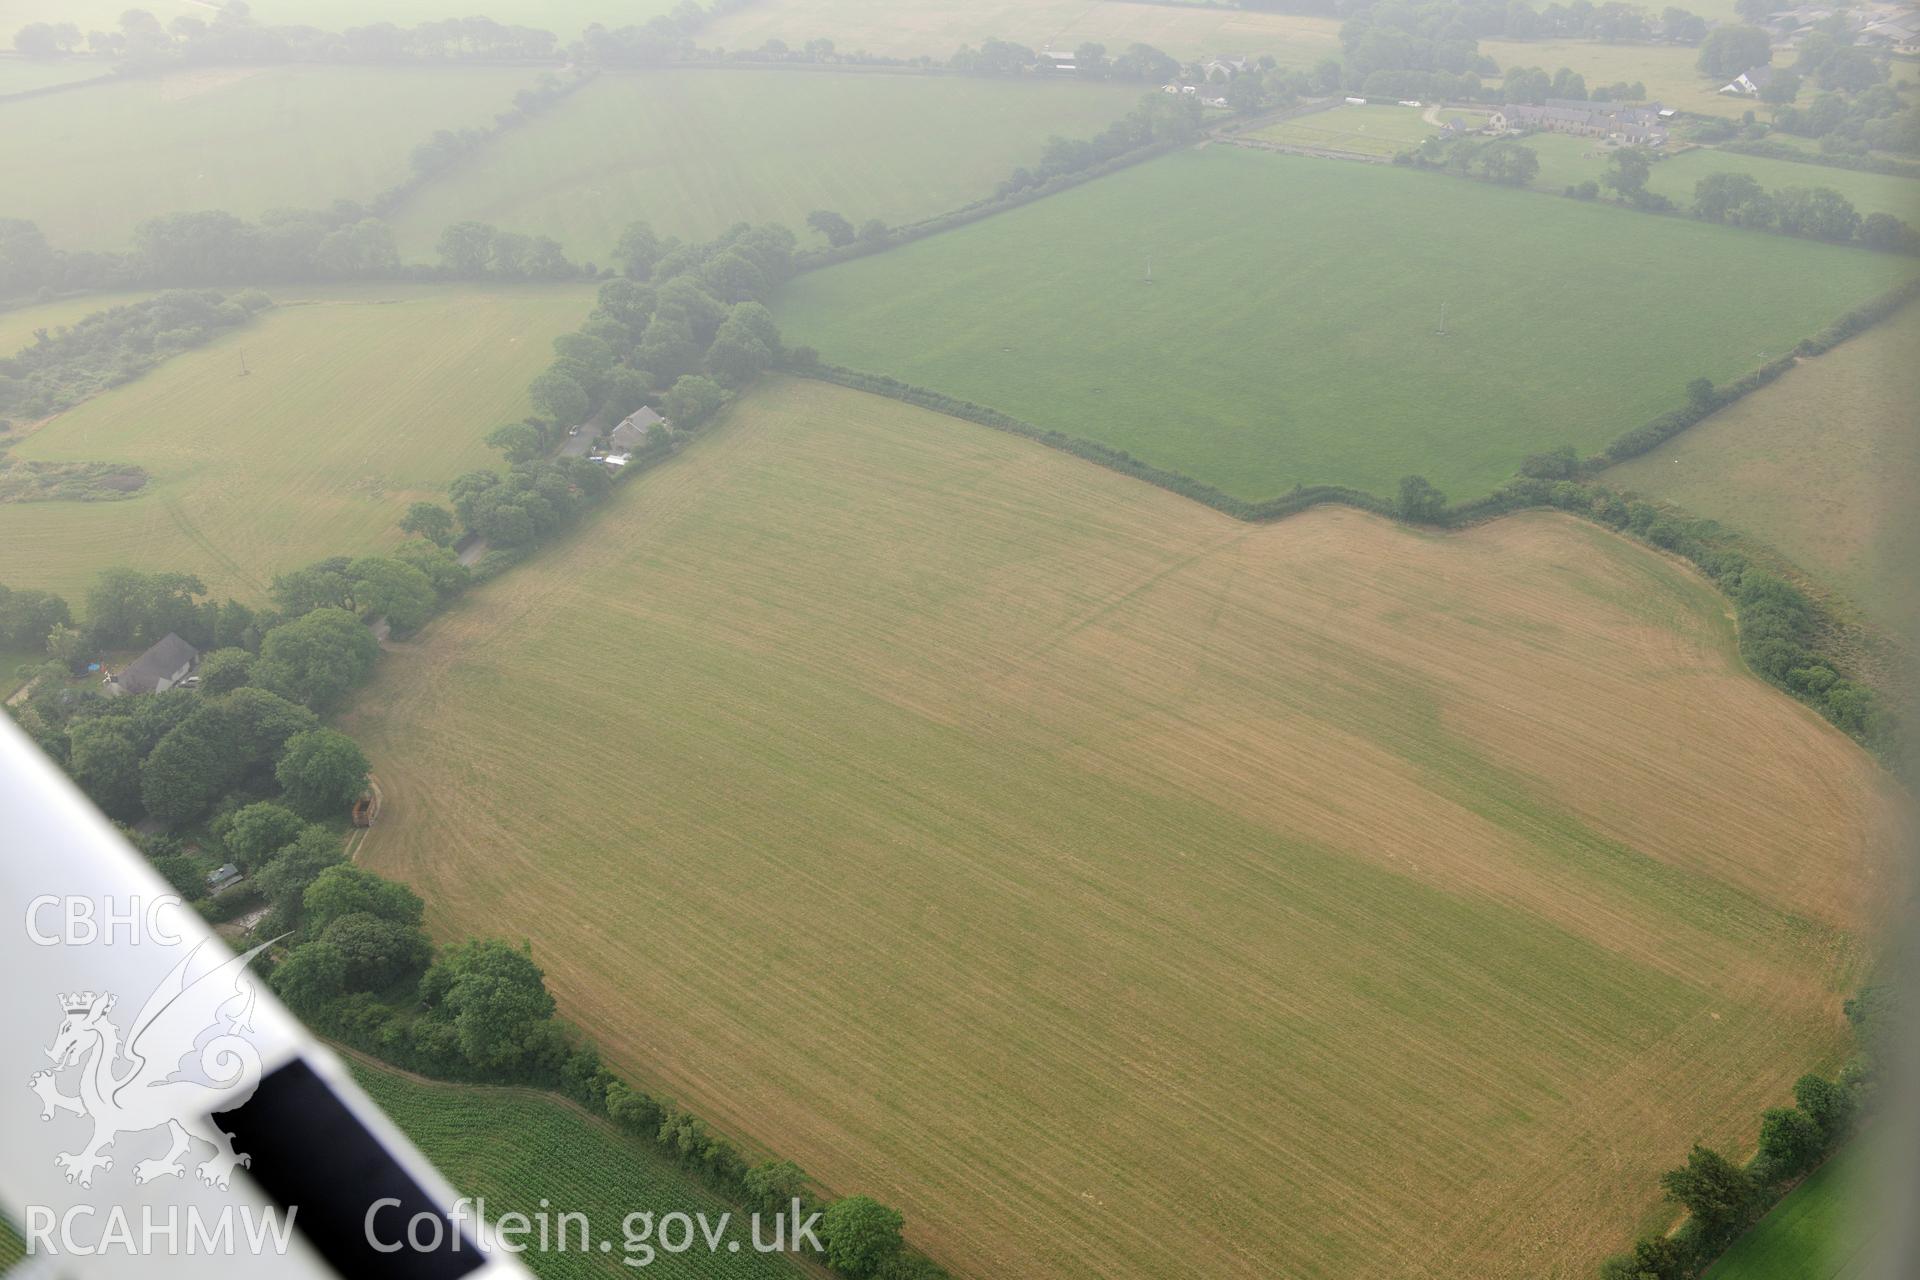 Royal Commission aerial photography of Wiston Roman fort recorded during drought conditions on 22nd July 2013.